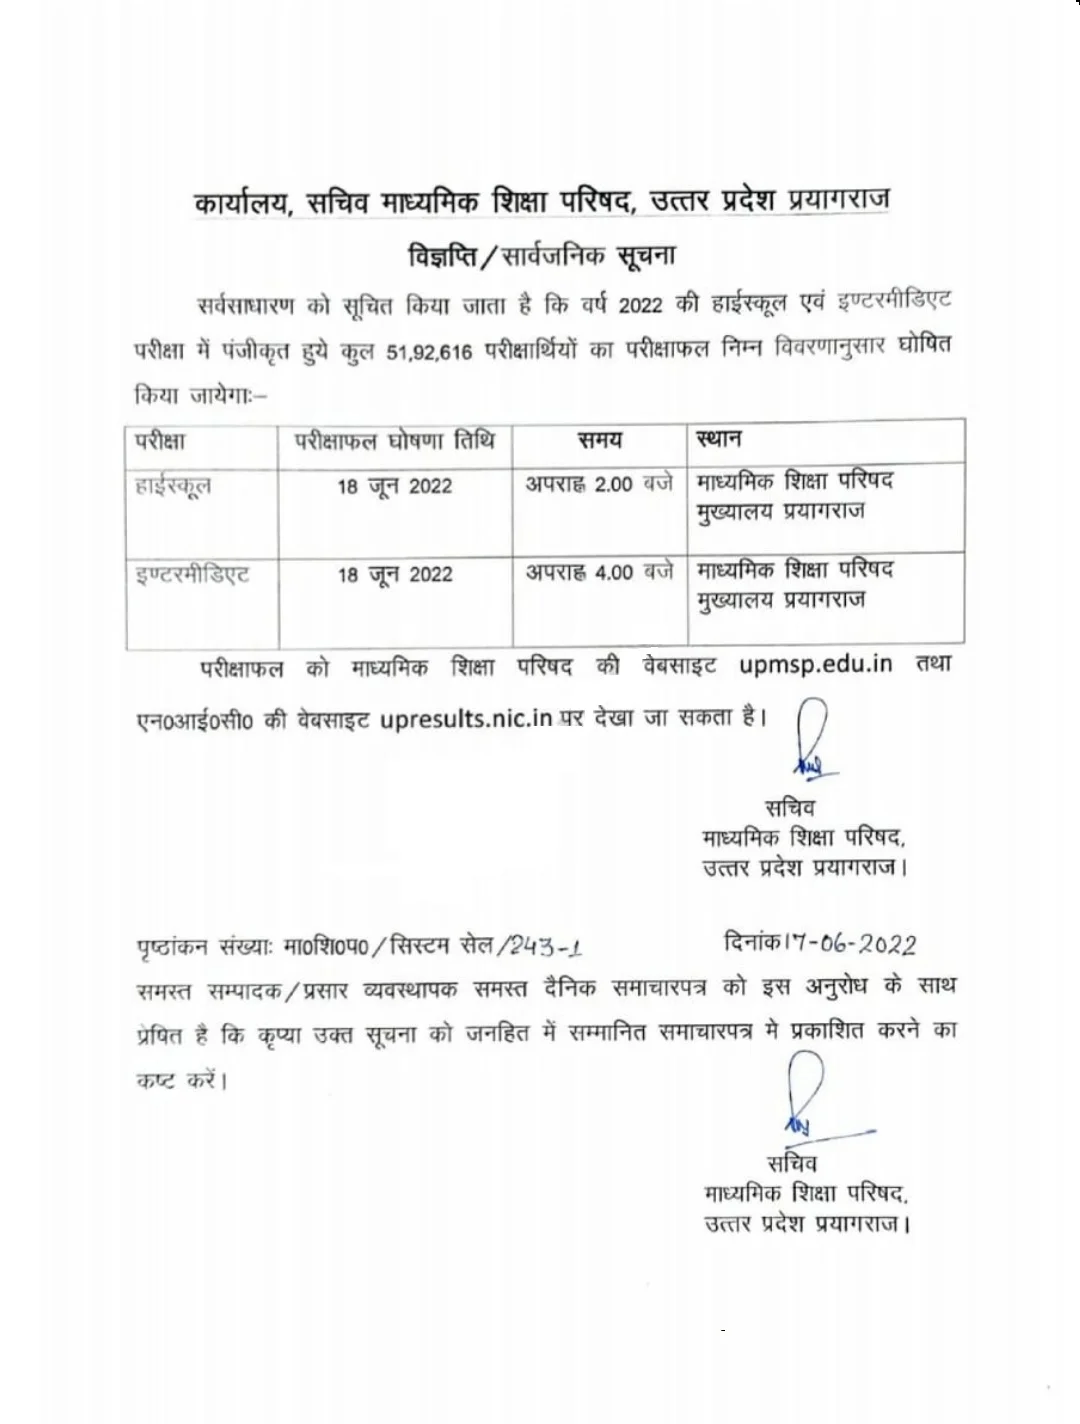 UP Board Result Date Declared